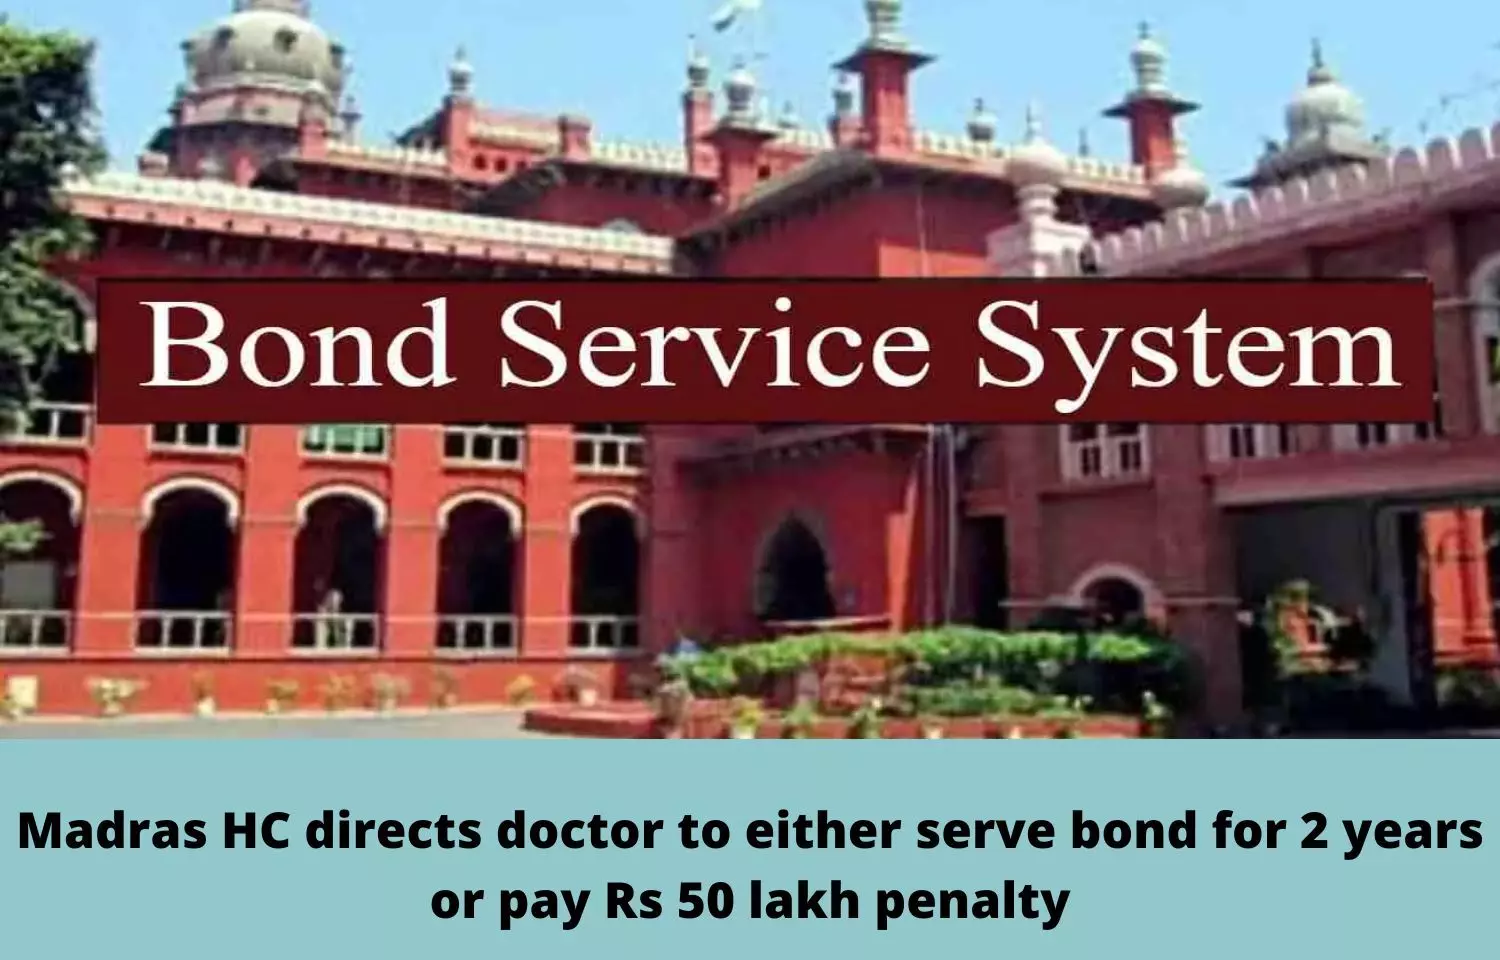 Madras HC directs doctor to either serve bond for 2 years or pay Rs 50 lakh penalty